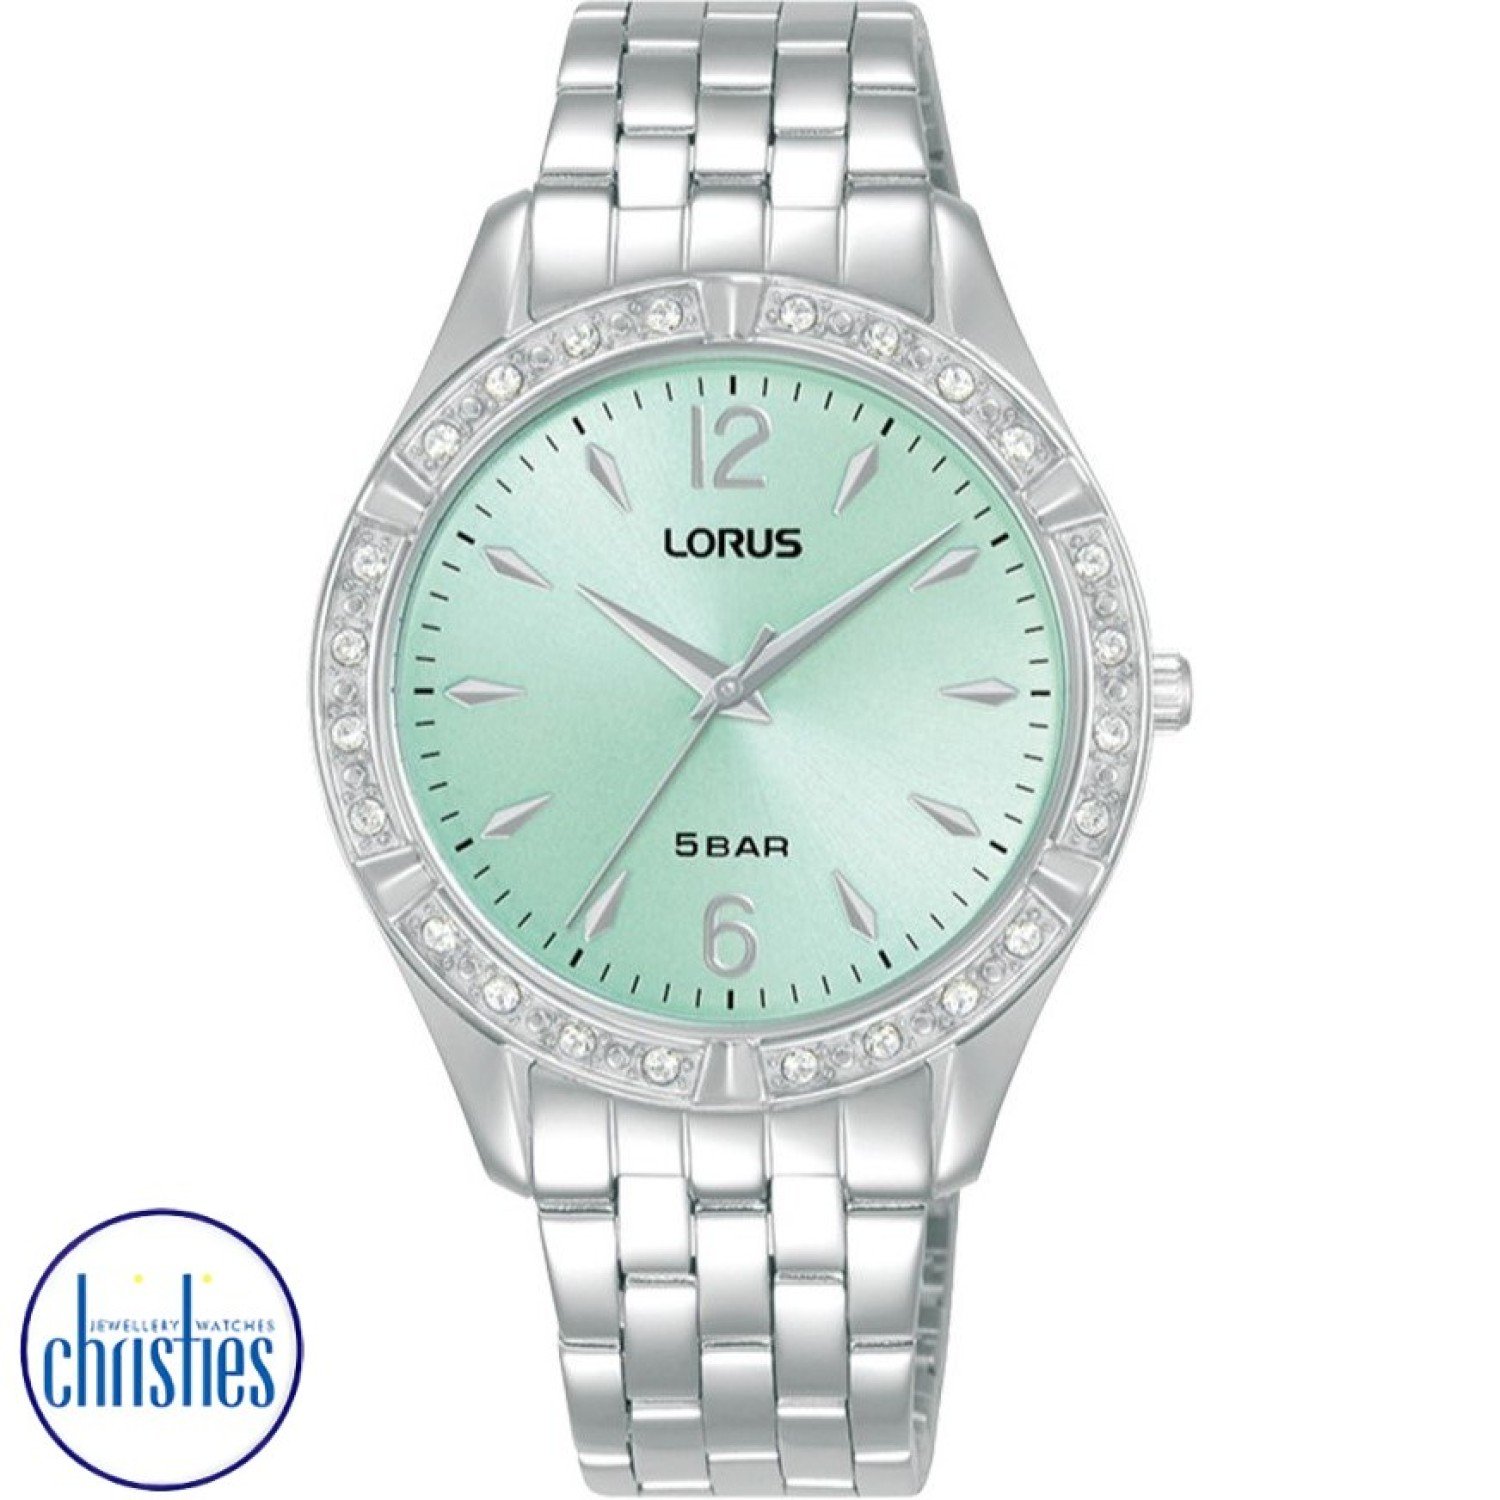 RG263WX9 Lorus Ladies Dress Analogue Watch RG240WX-9 Lorus by Seiko Auckland s offers a diverse range of watch styles, including analog, digital, sports, and dress watches